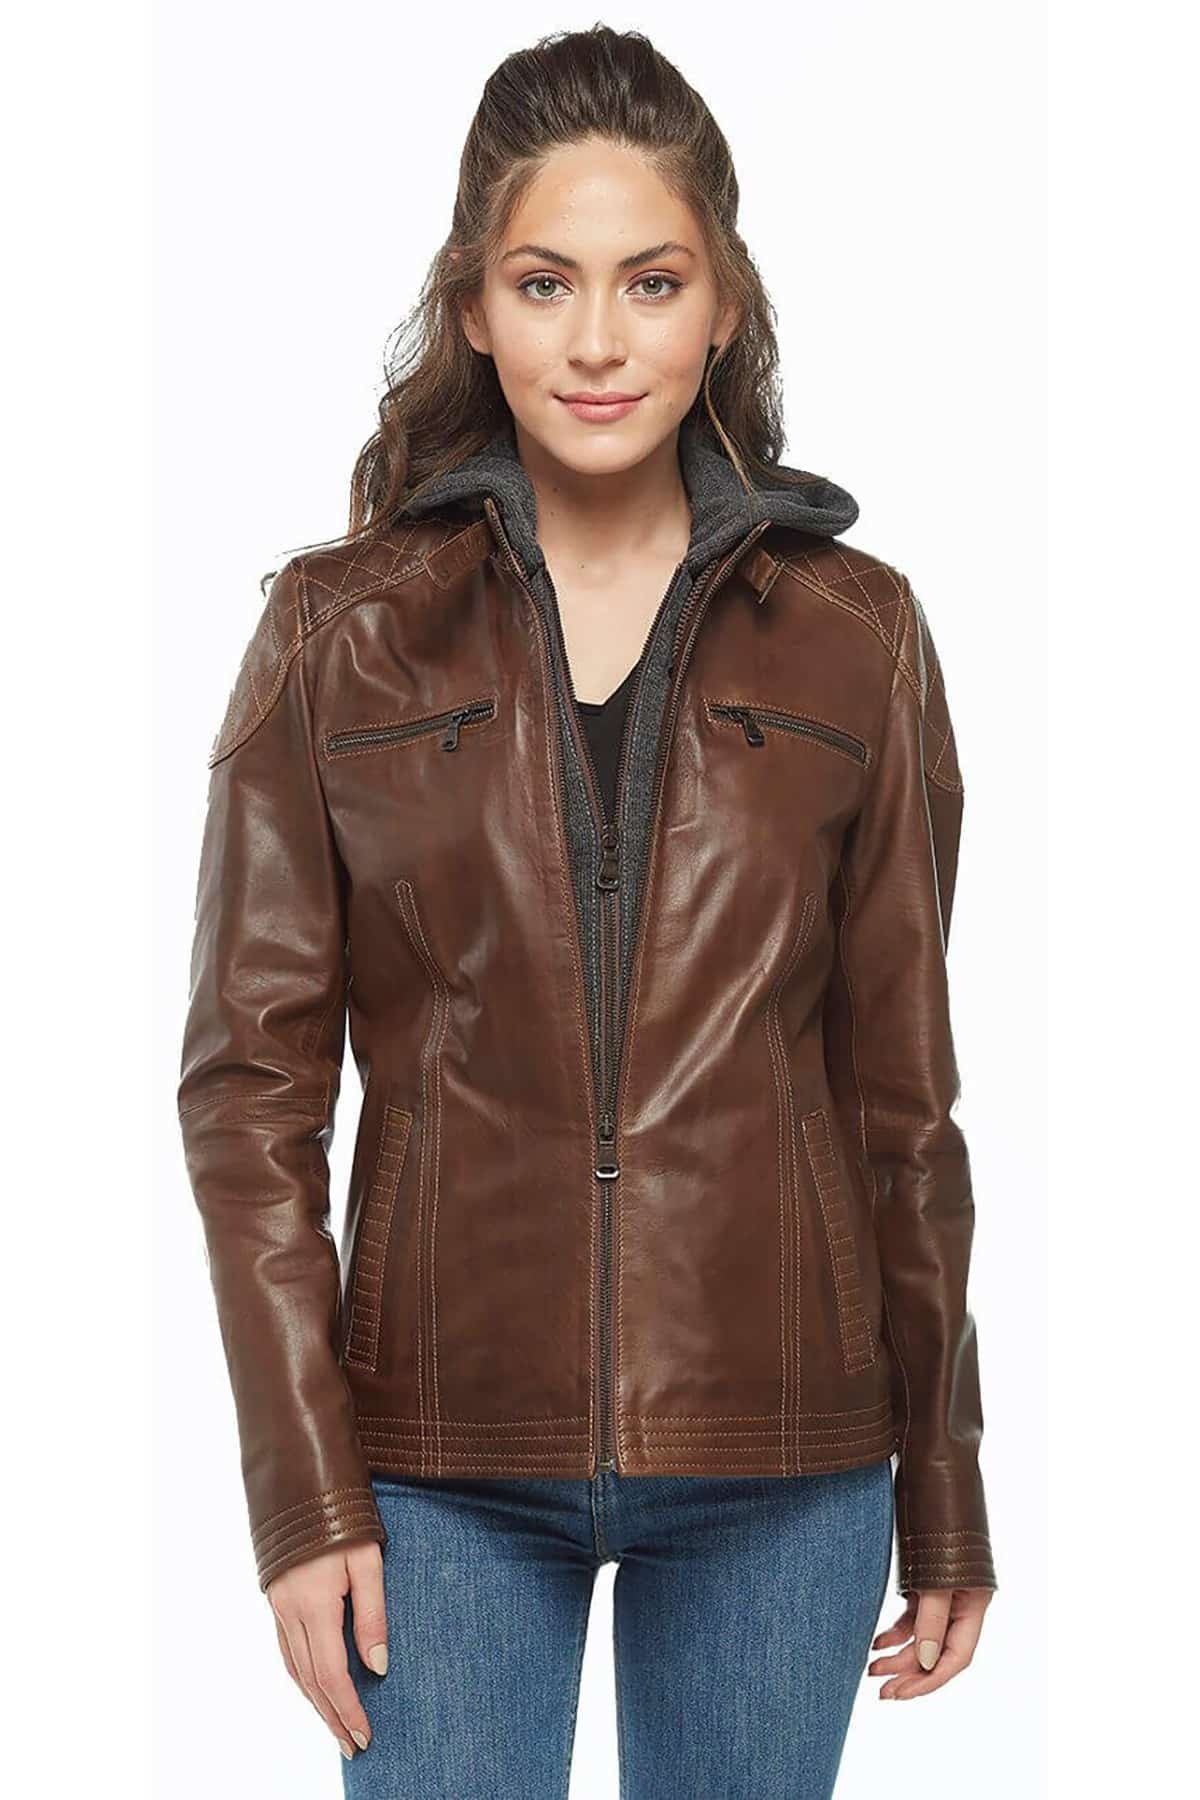 Brown Women’s Hooded Leather Jacket3